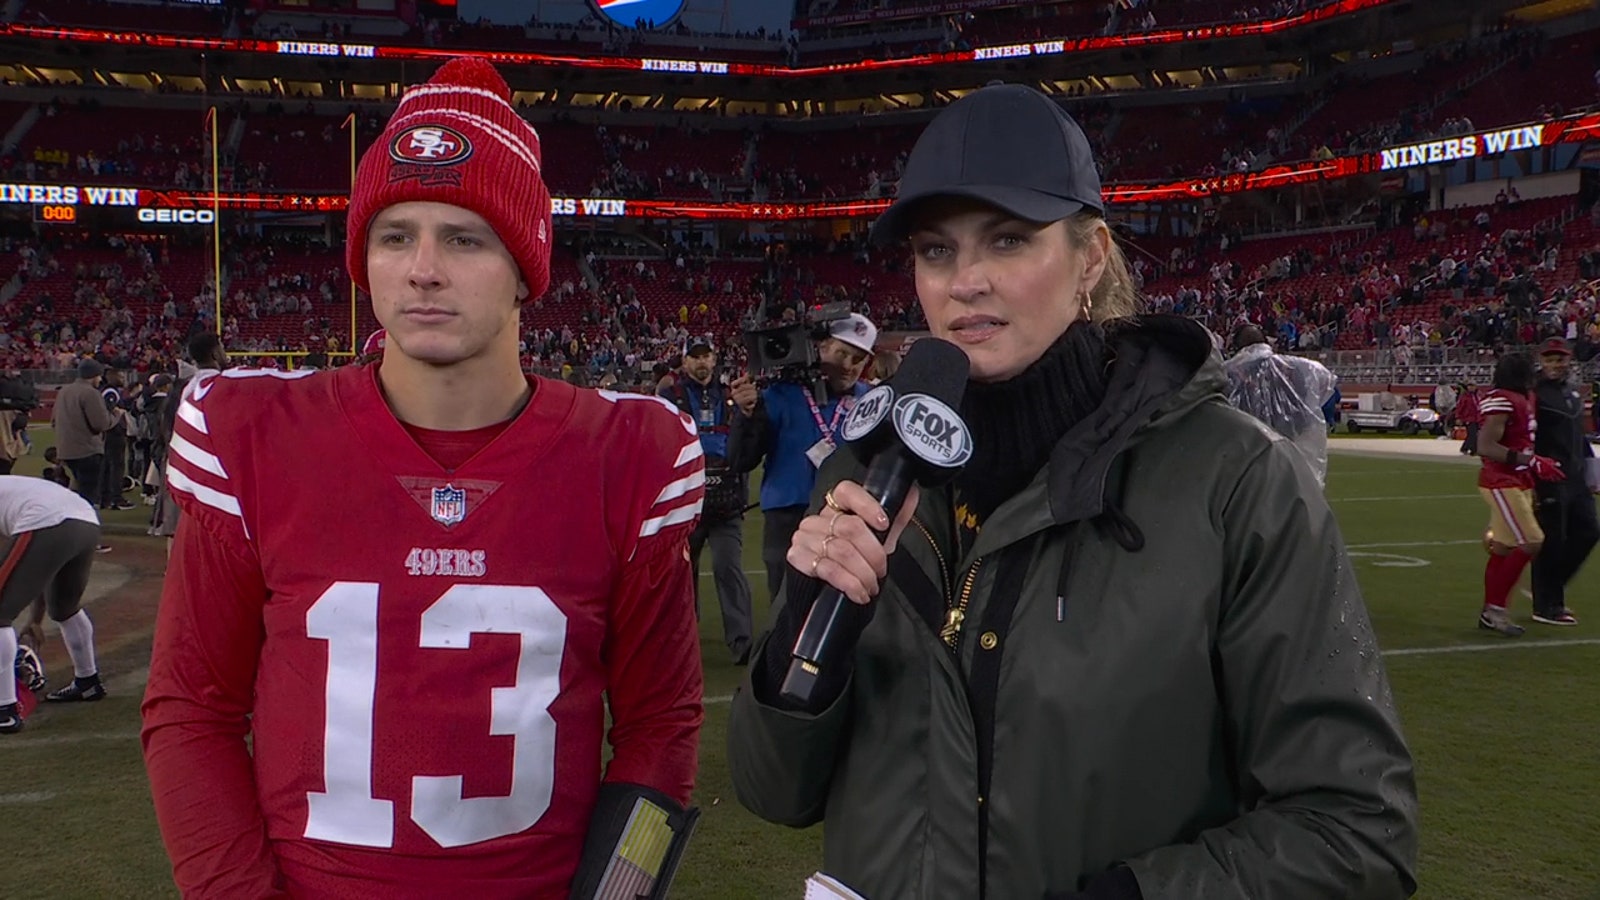 'There's a lot of help around': Brock Purdy says after 49ers win over Bucks